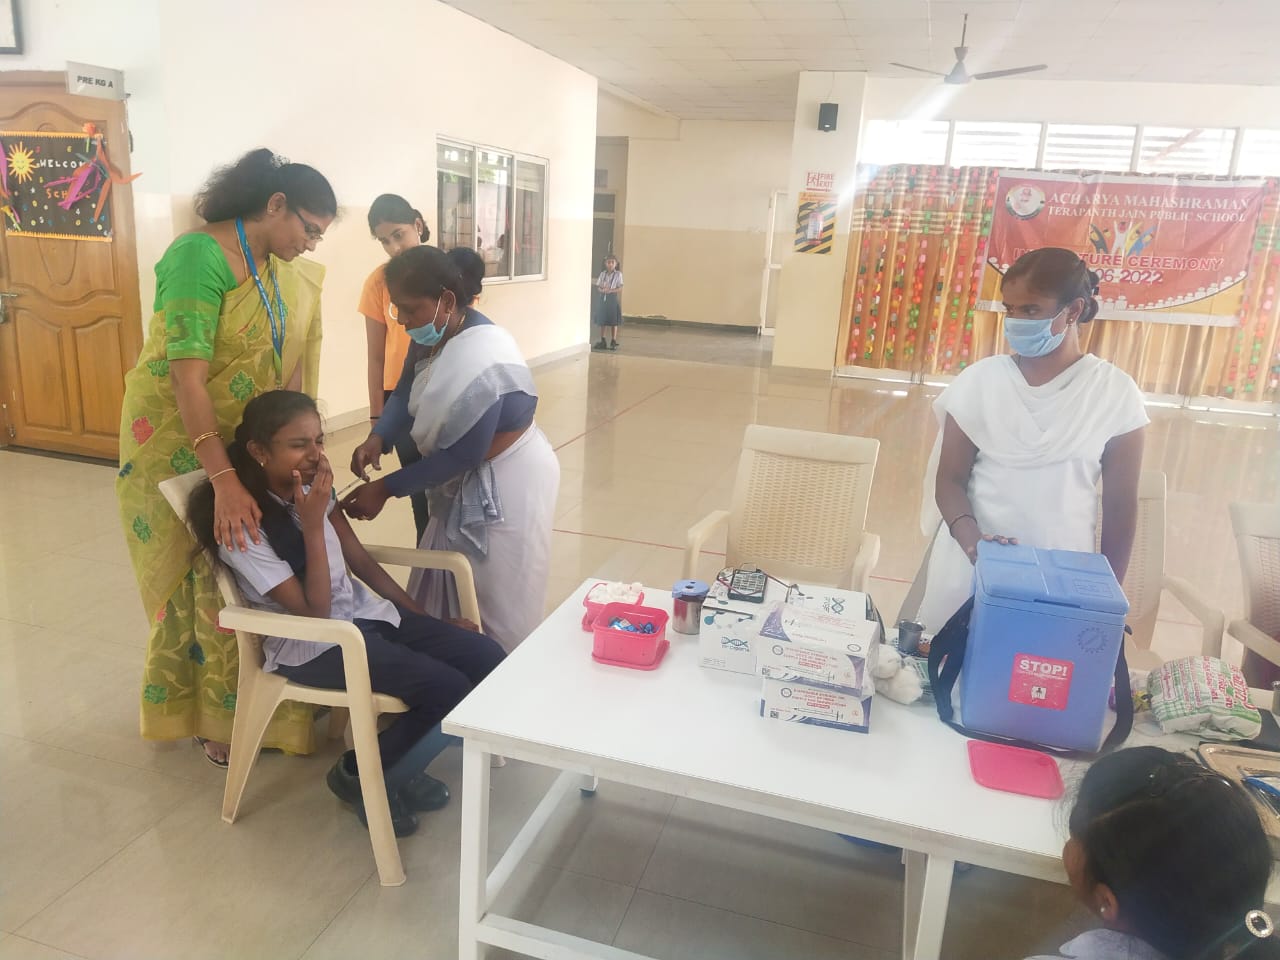 VACCINATION CAMP